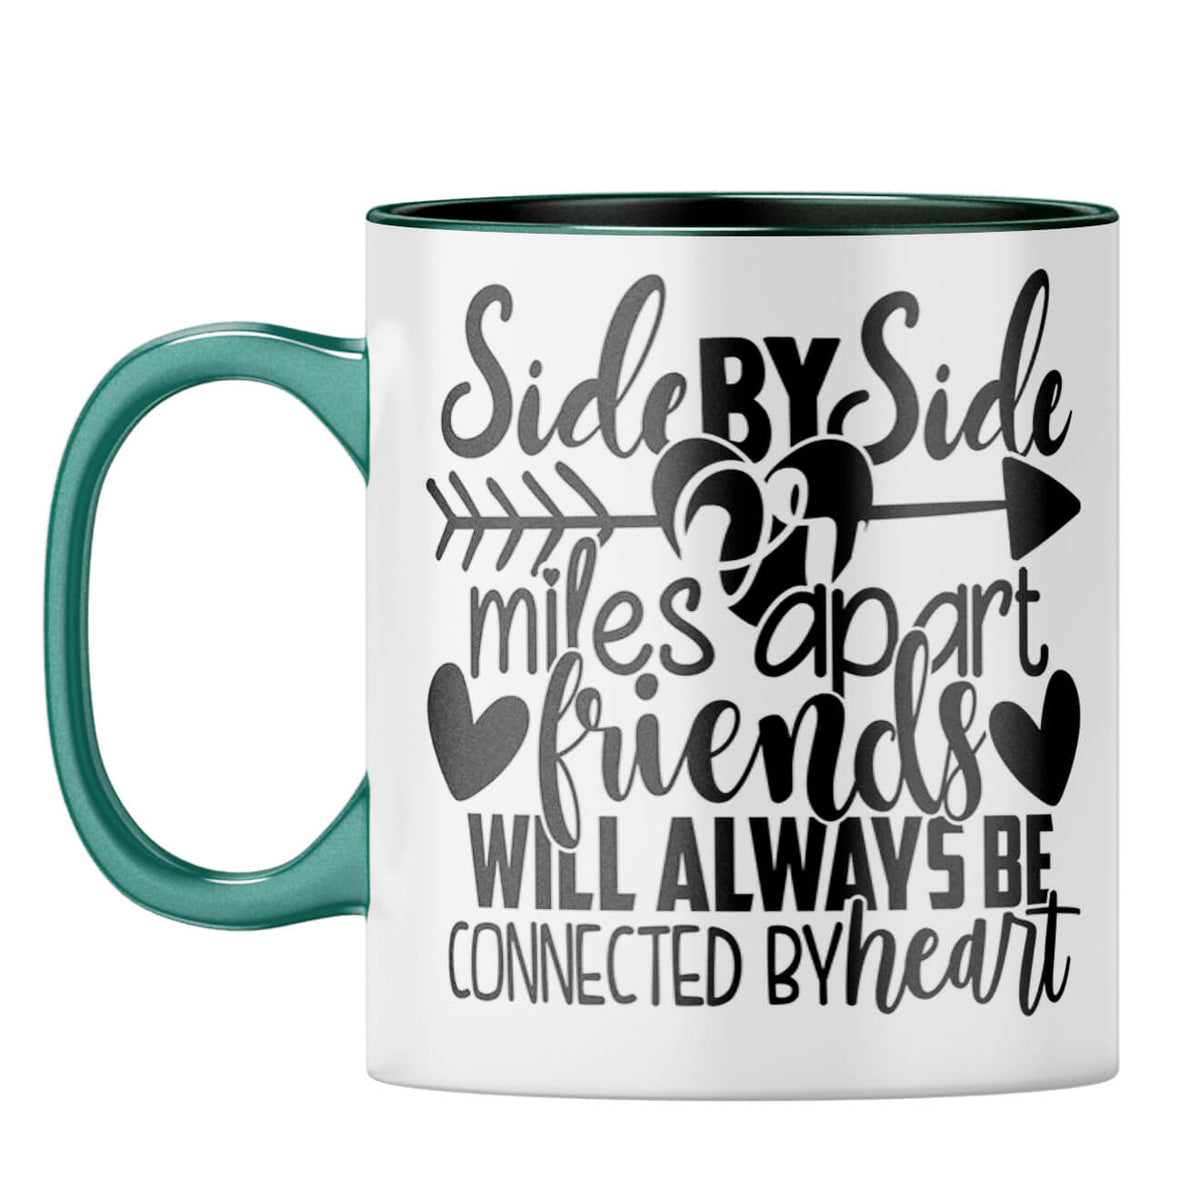 Friends Connected By Heart Coffee Mug